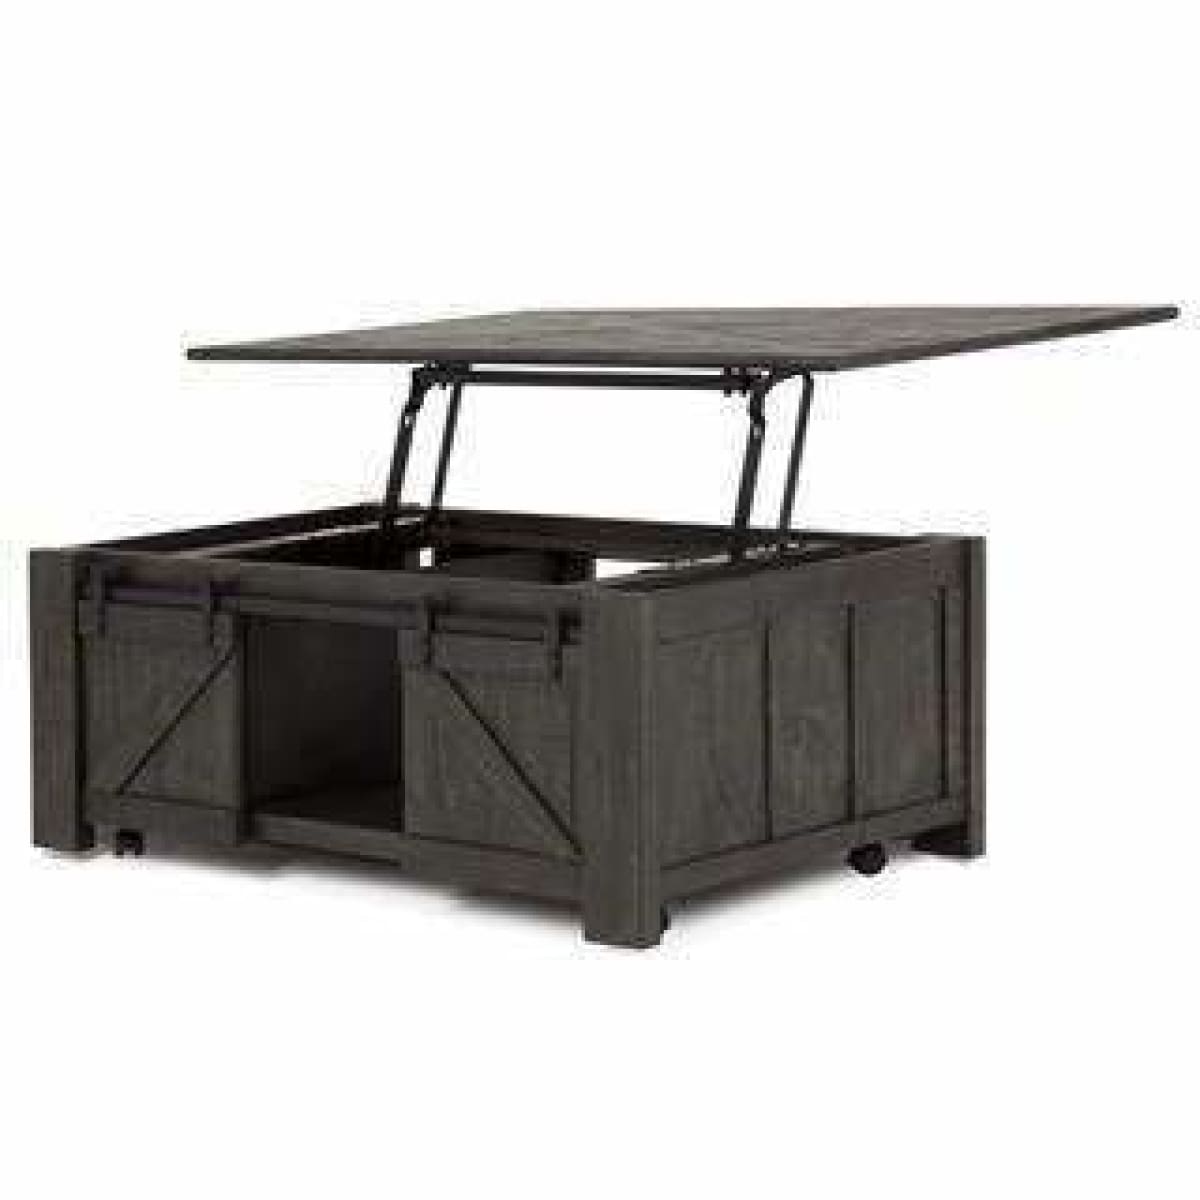 Garrett Rectangular Lift Top Cocktail Table w/Casters - COFFEE TABLE